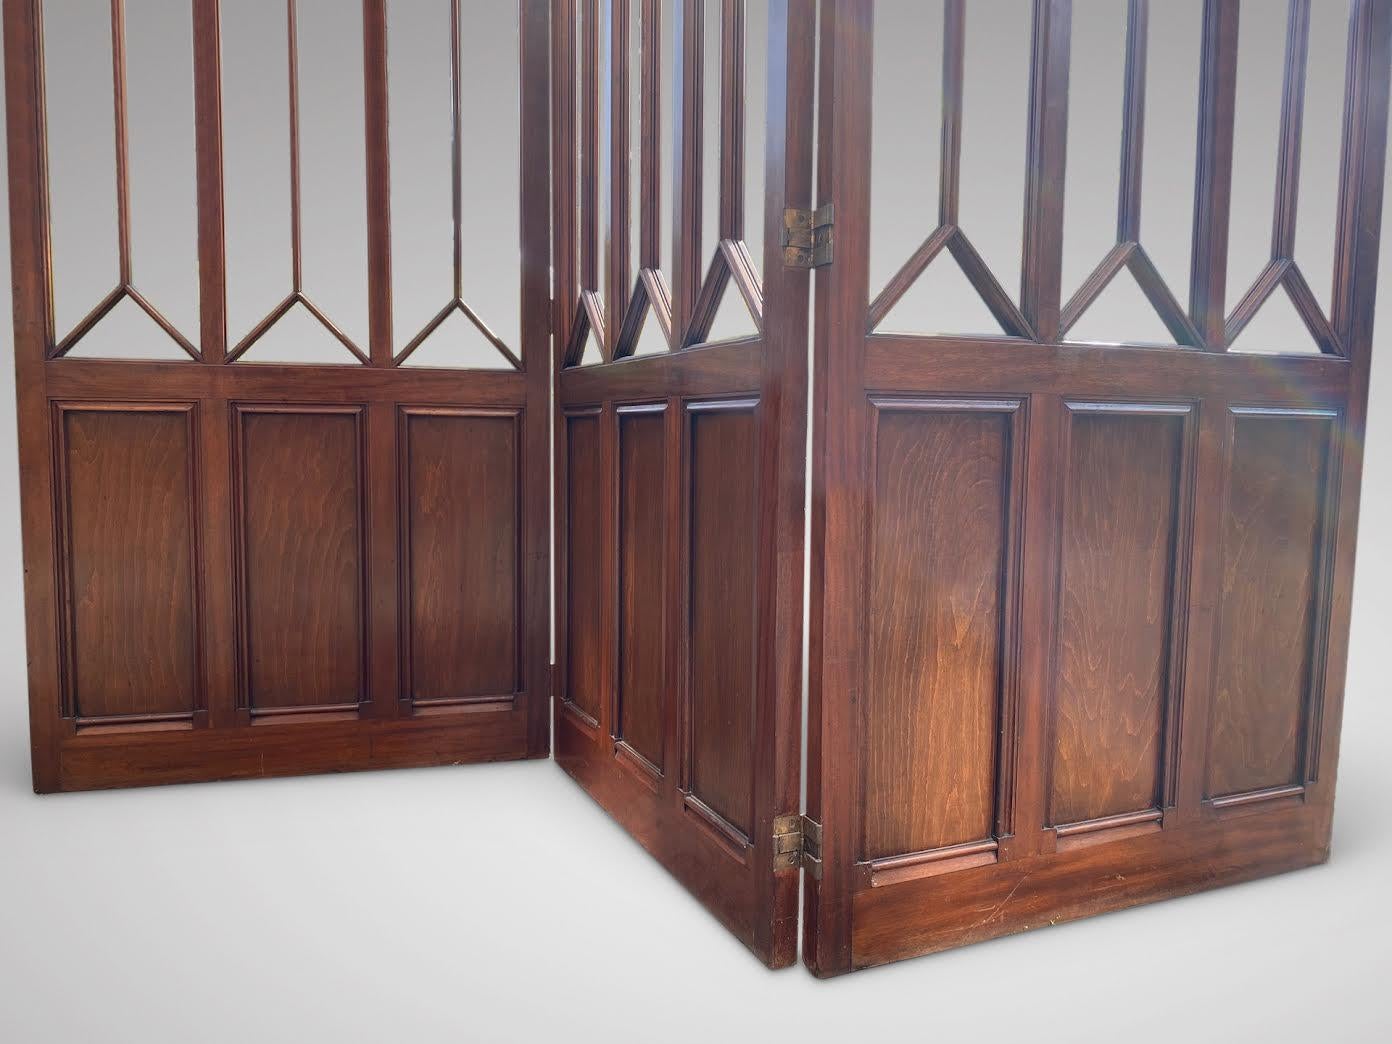 19th Century Stunning Quality Three Panel Folding Screen in Solid Mahogany For Sale 2